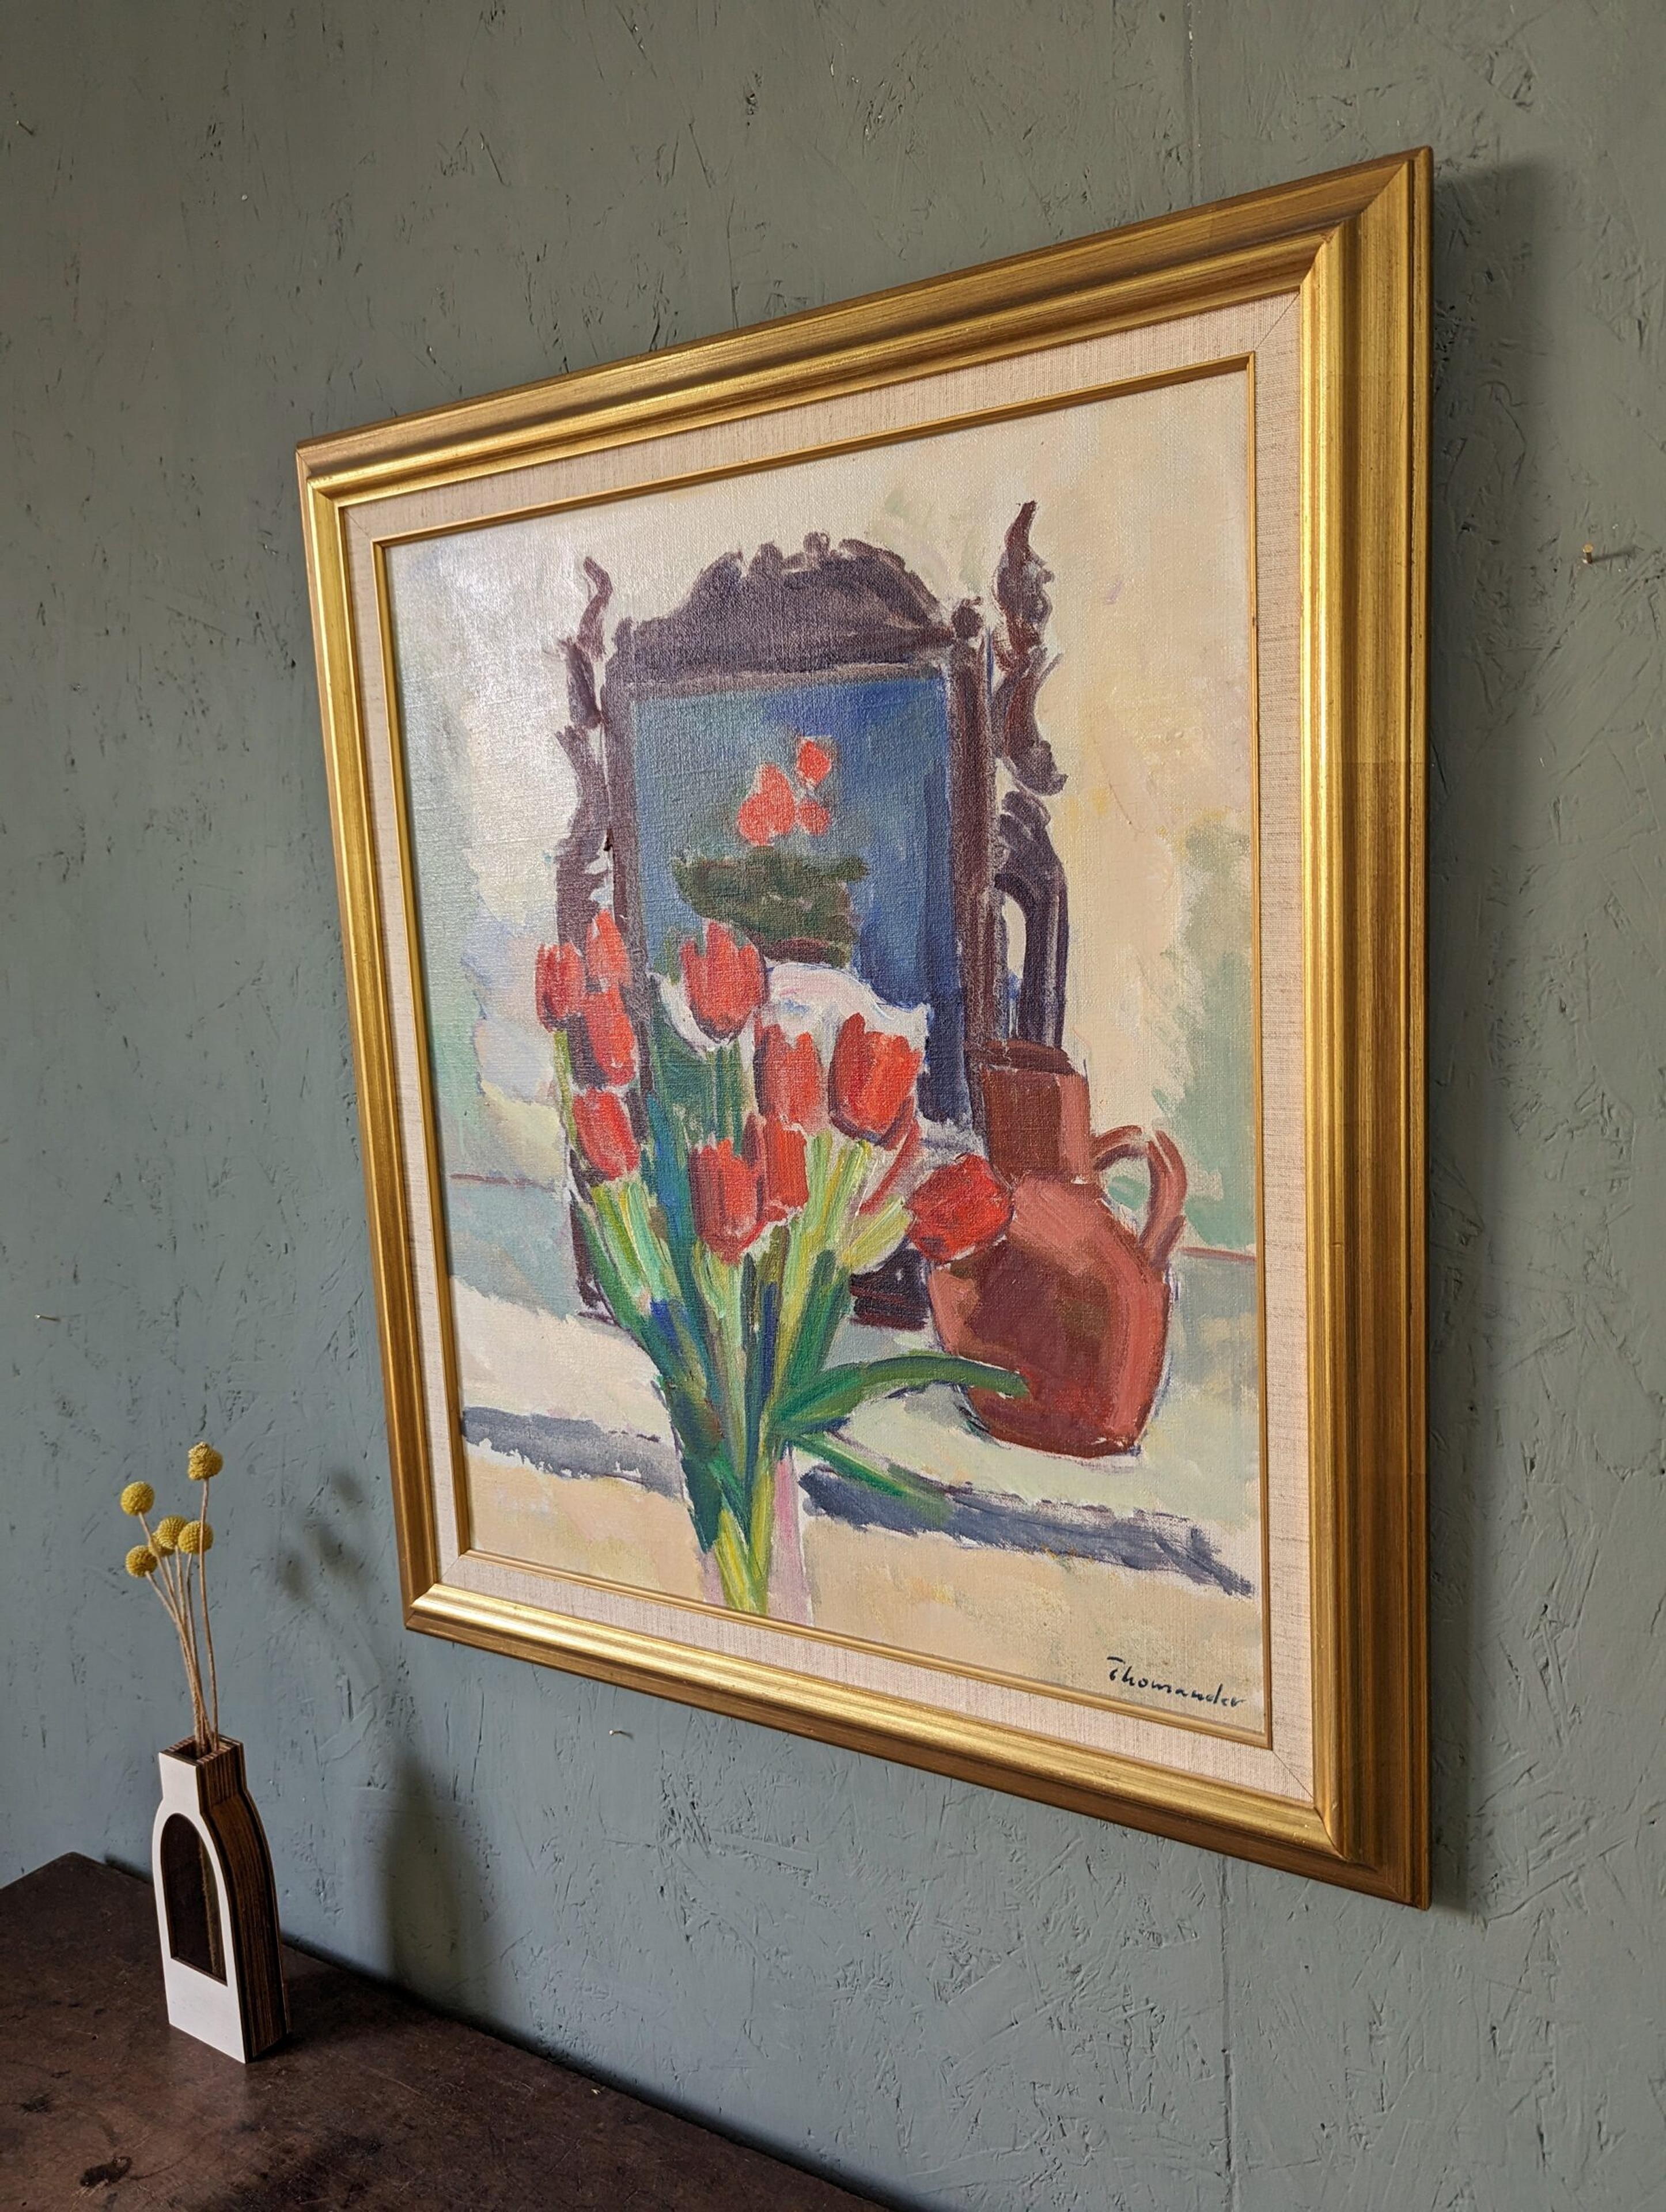 RED TULIPS
Size: 67 x 58 cm (including frame)
Oil on Canvas

A captivating and well-balanced interior still life composition, executed in oil onto canvas.

Upon first glance, a vase of striking red tulips in the foreground captures our attention.